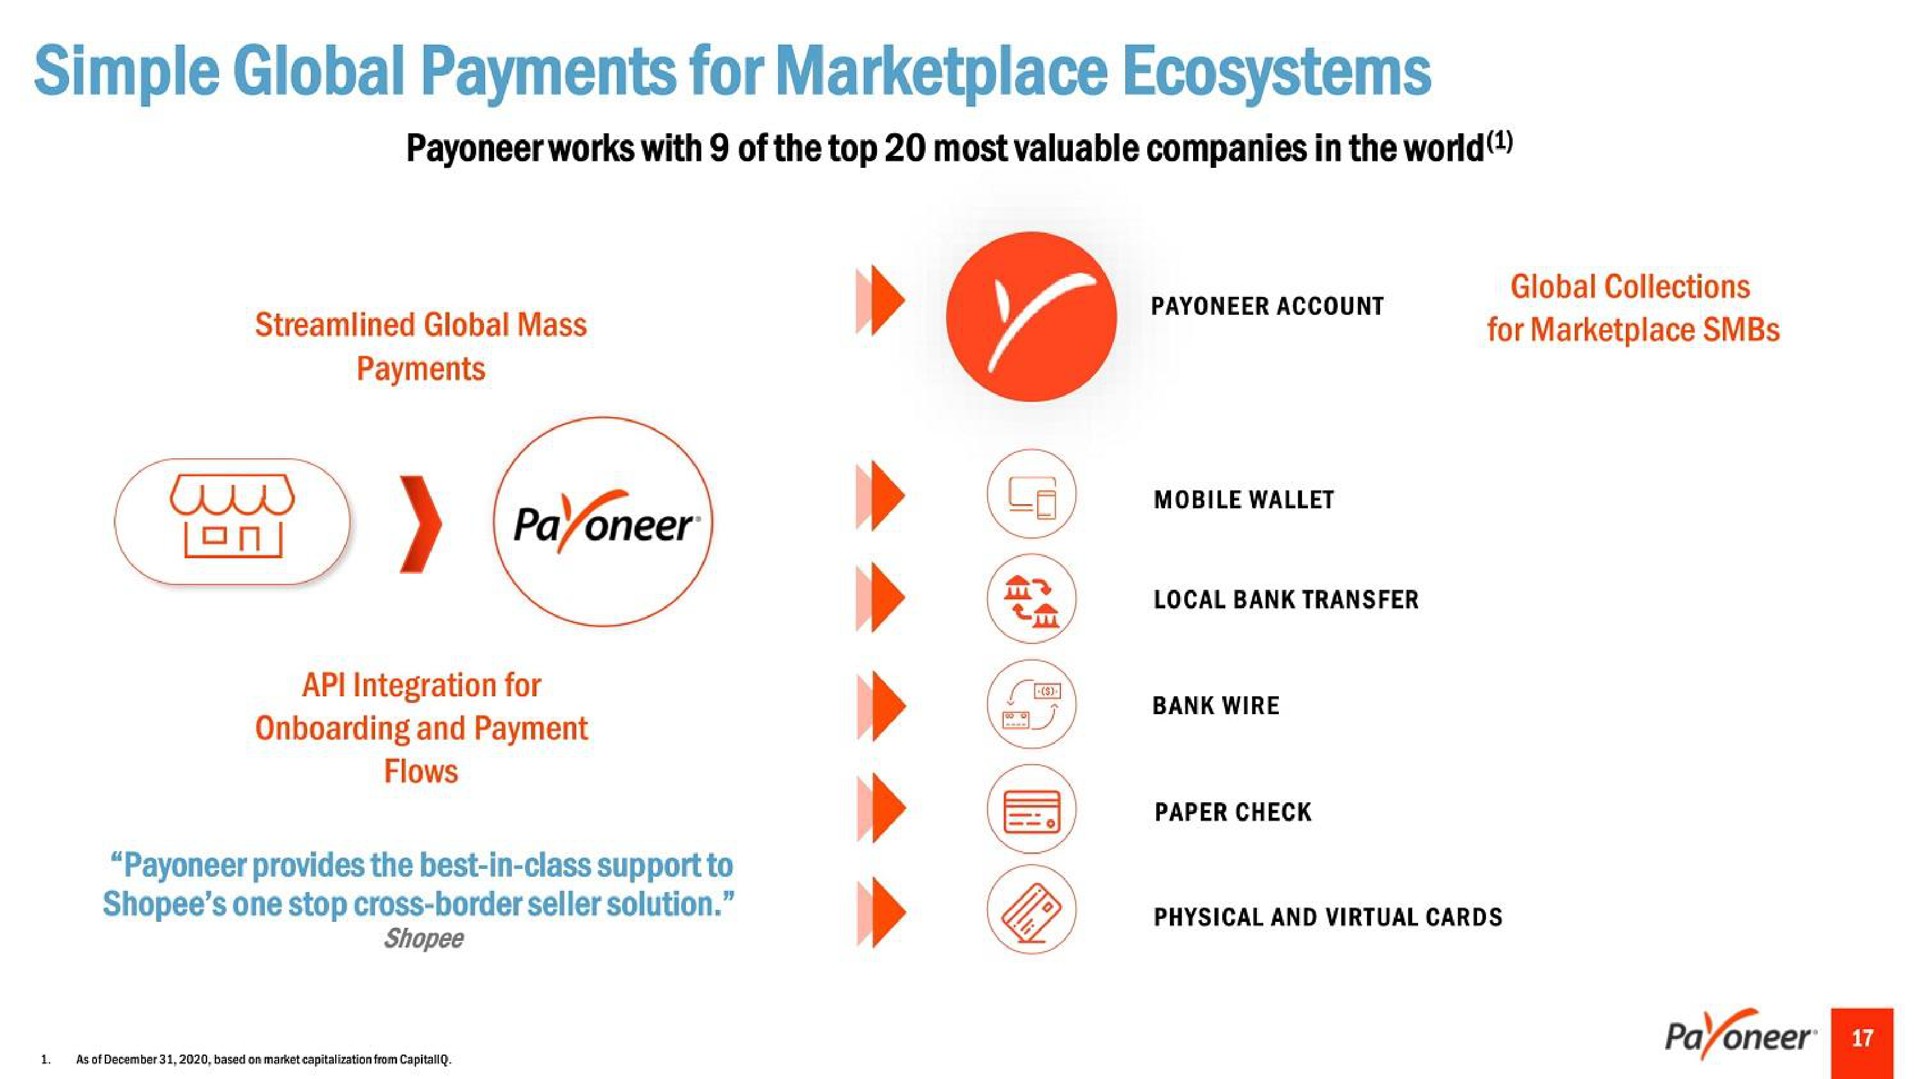 simple global payments for ecosystems i | Payoneer